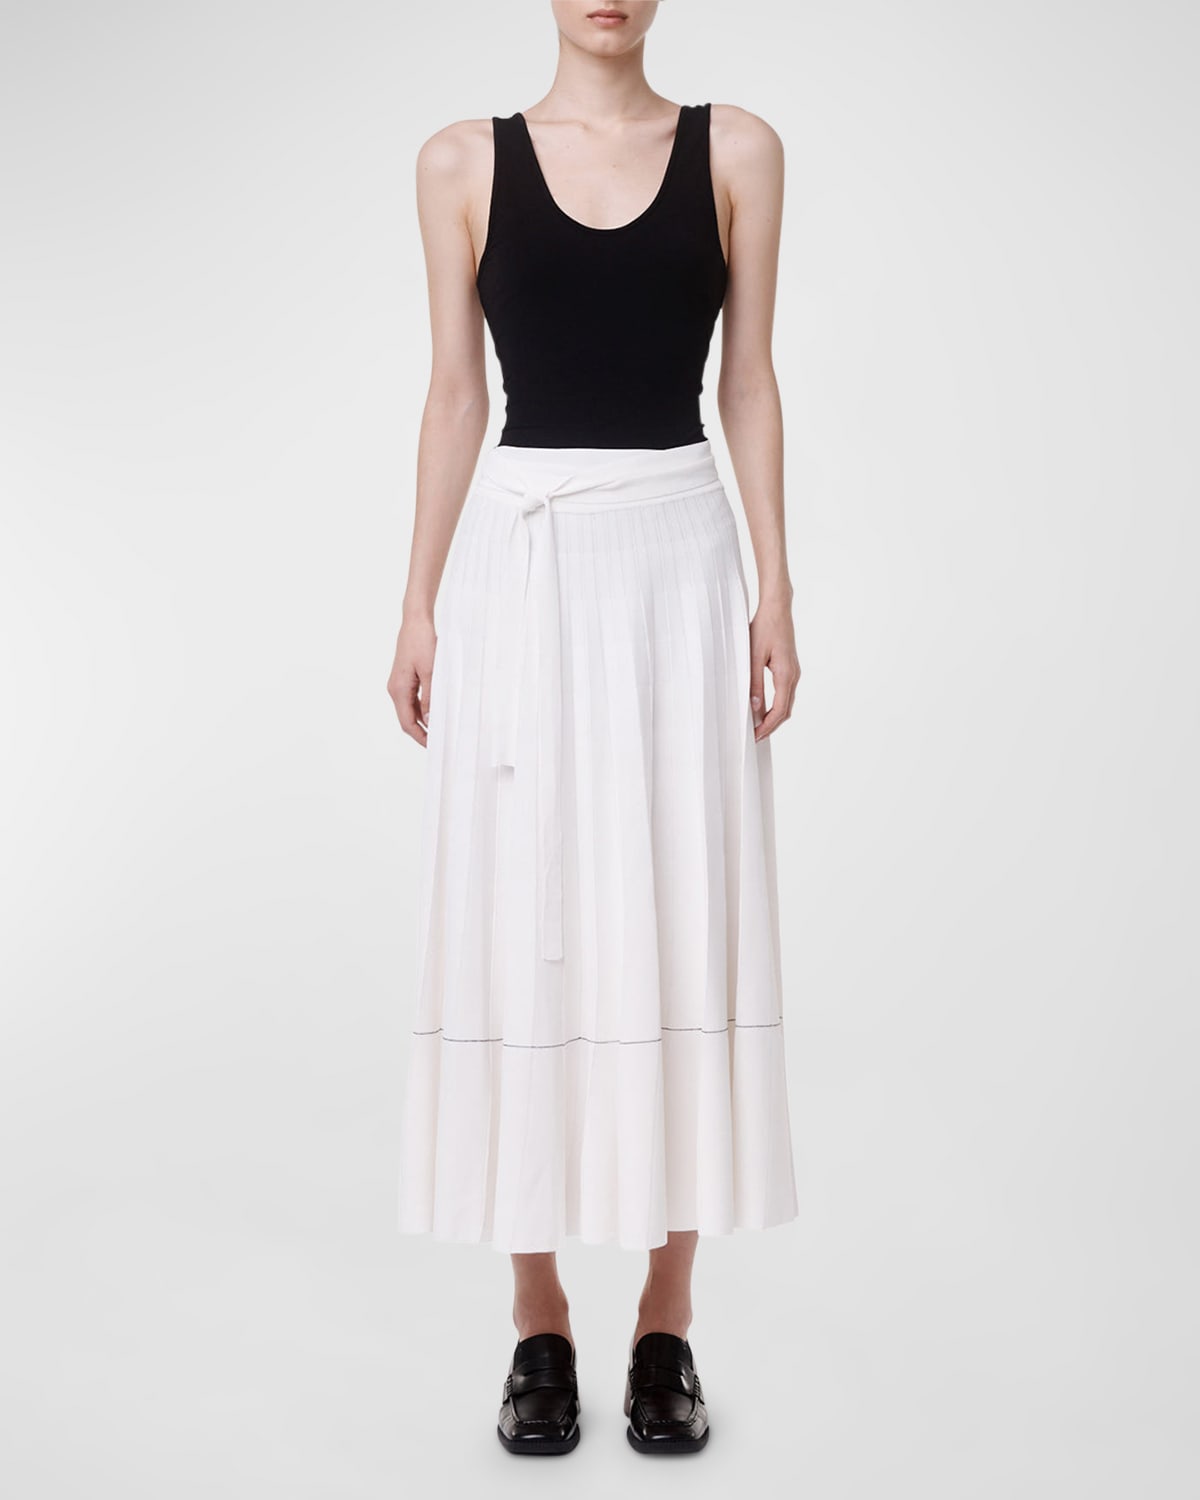 Another Tomorrow Pleated Midi Skirt with Tie Belt